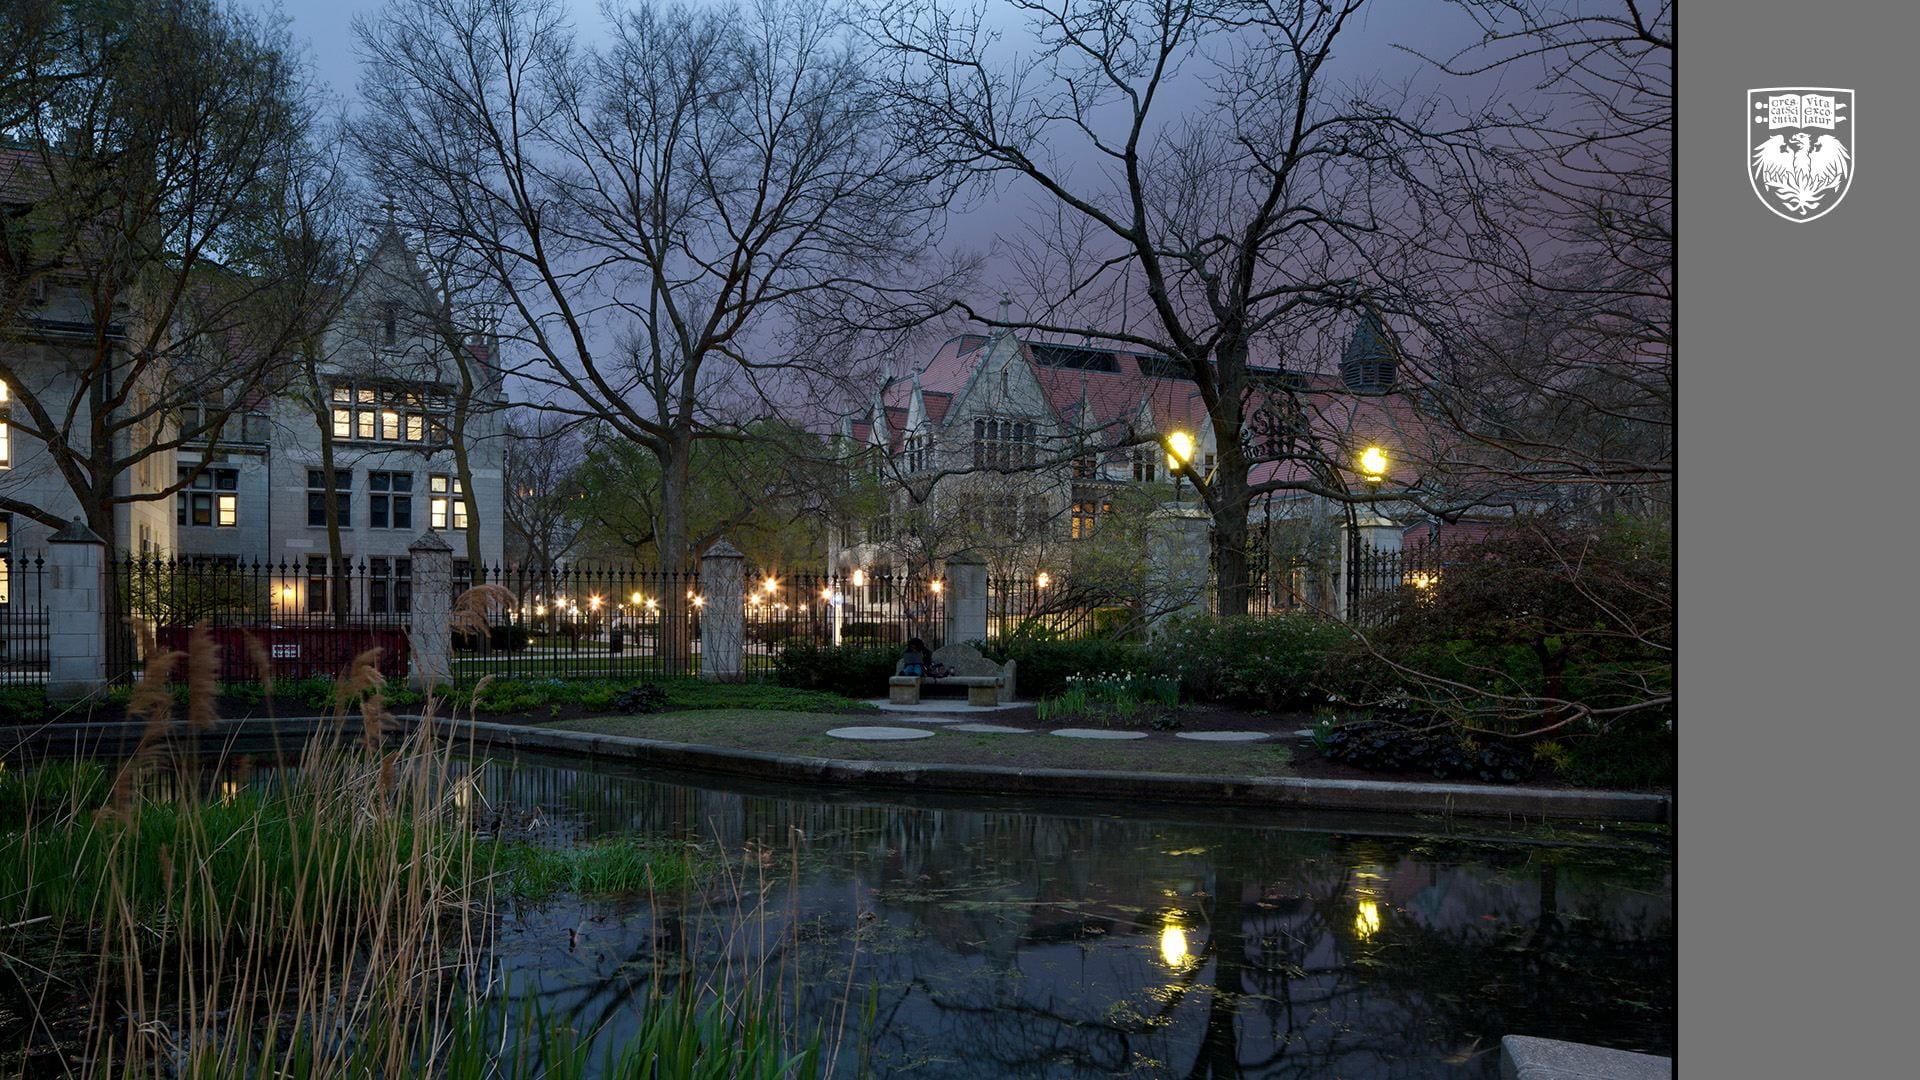 Pond in the evening with view of campus buildings and street lights on